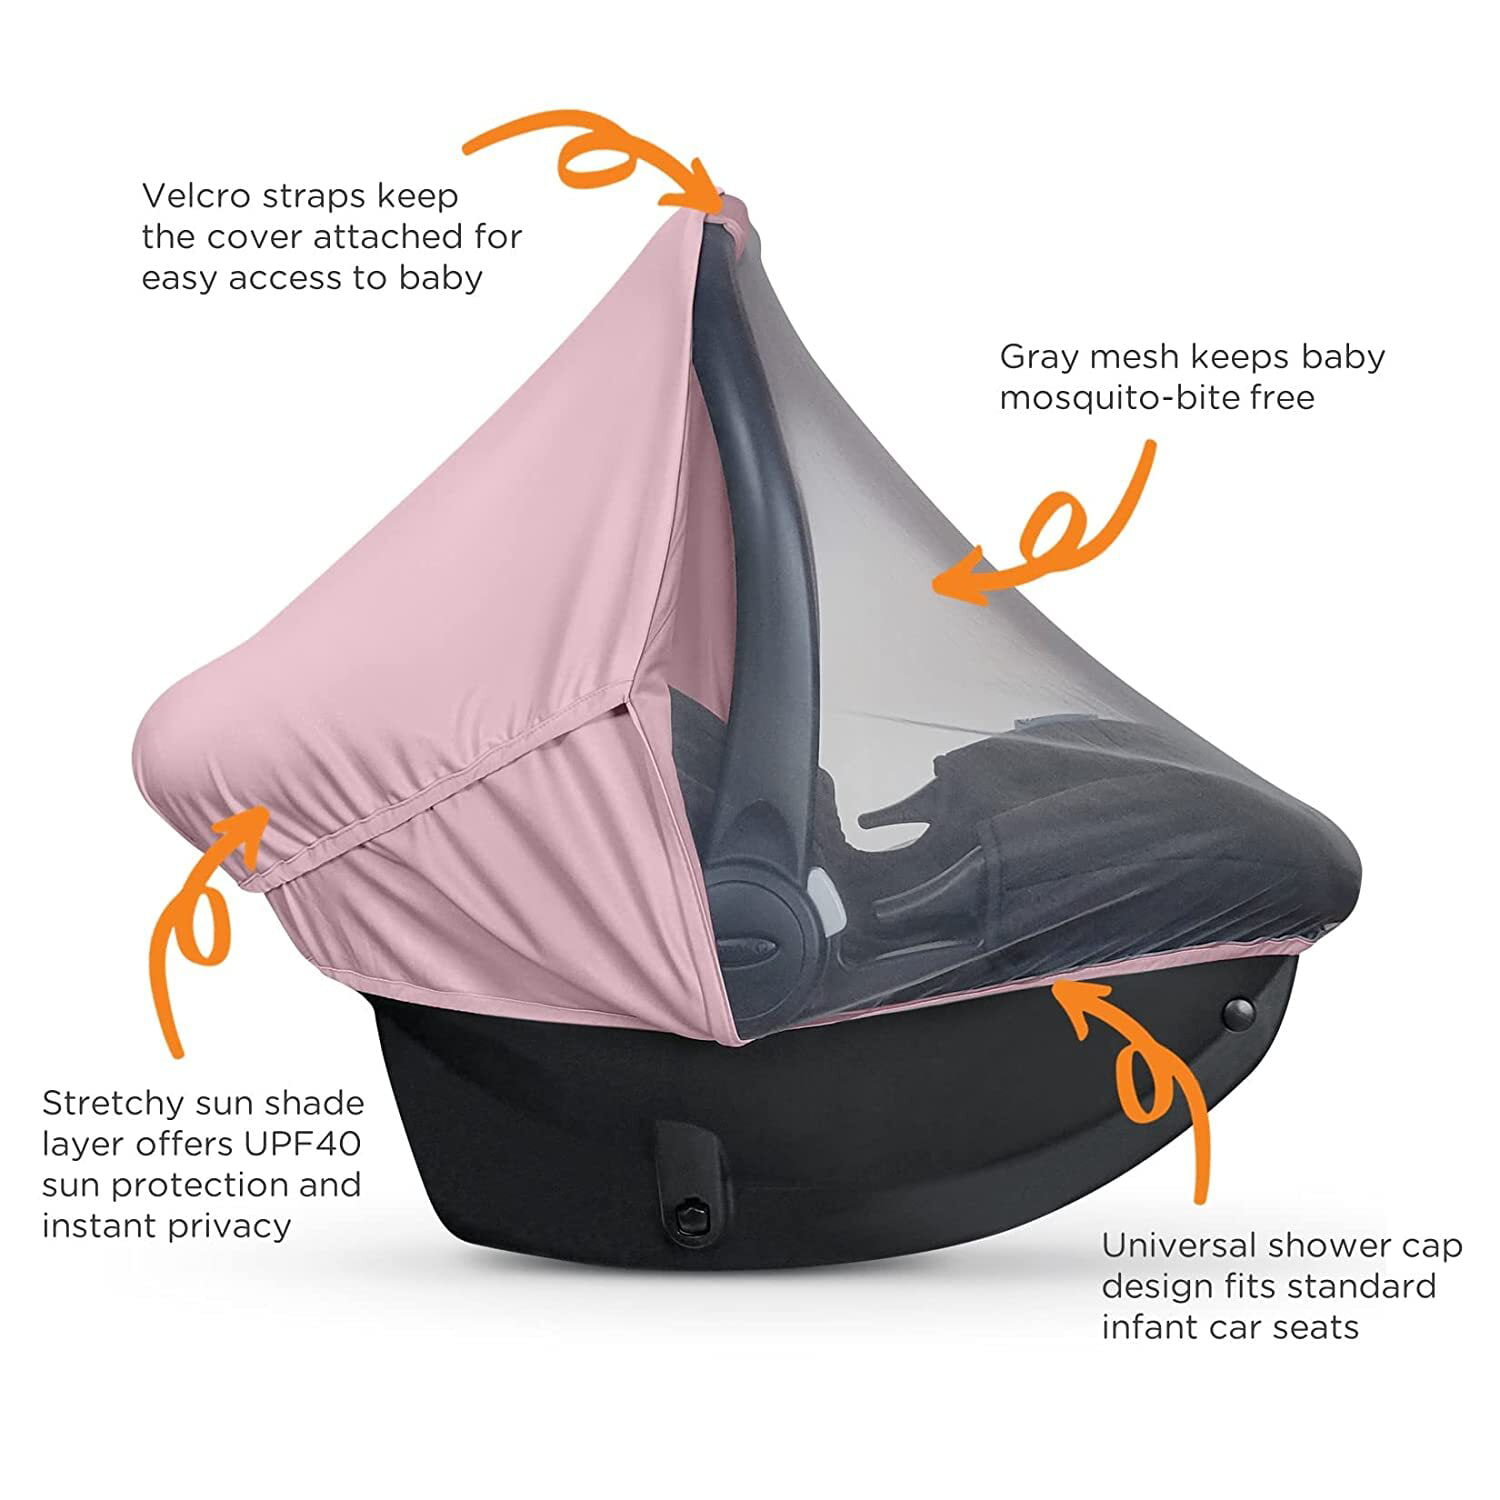 Storage Bag Perfect Bug Net for Strollers Bassinet Carseat with Windows Versatile Universal Double Zipper Baby Mosquito Net 3 in 1 Sun Shade and Mosquito Net for Stroller Sun Protection 